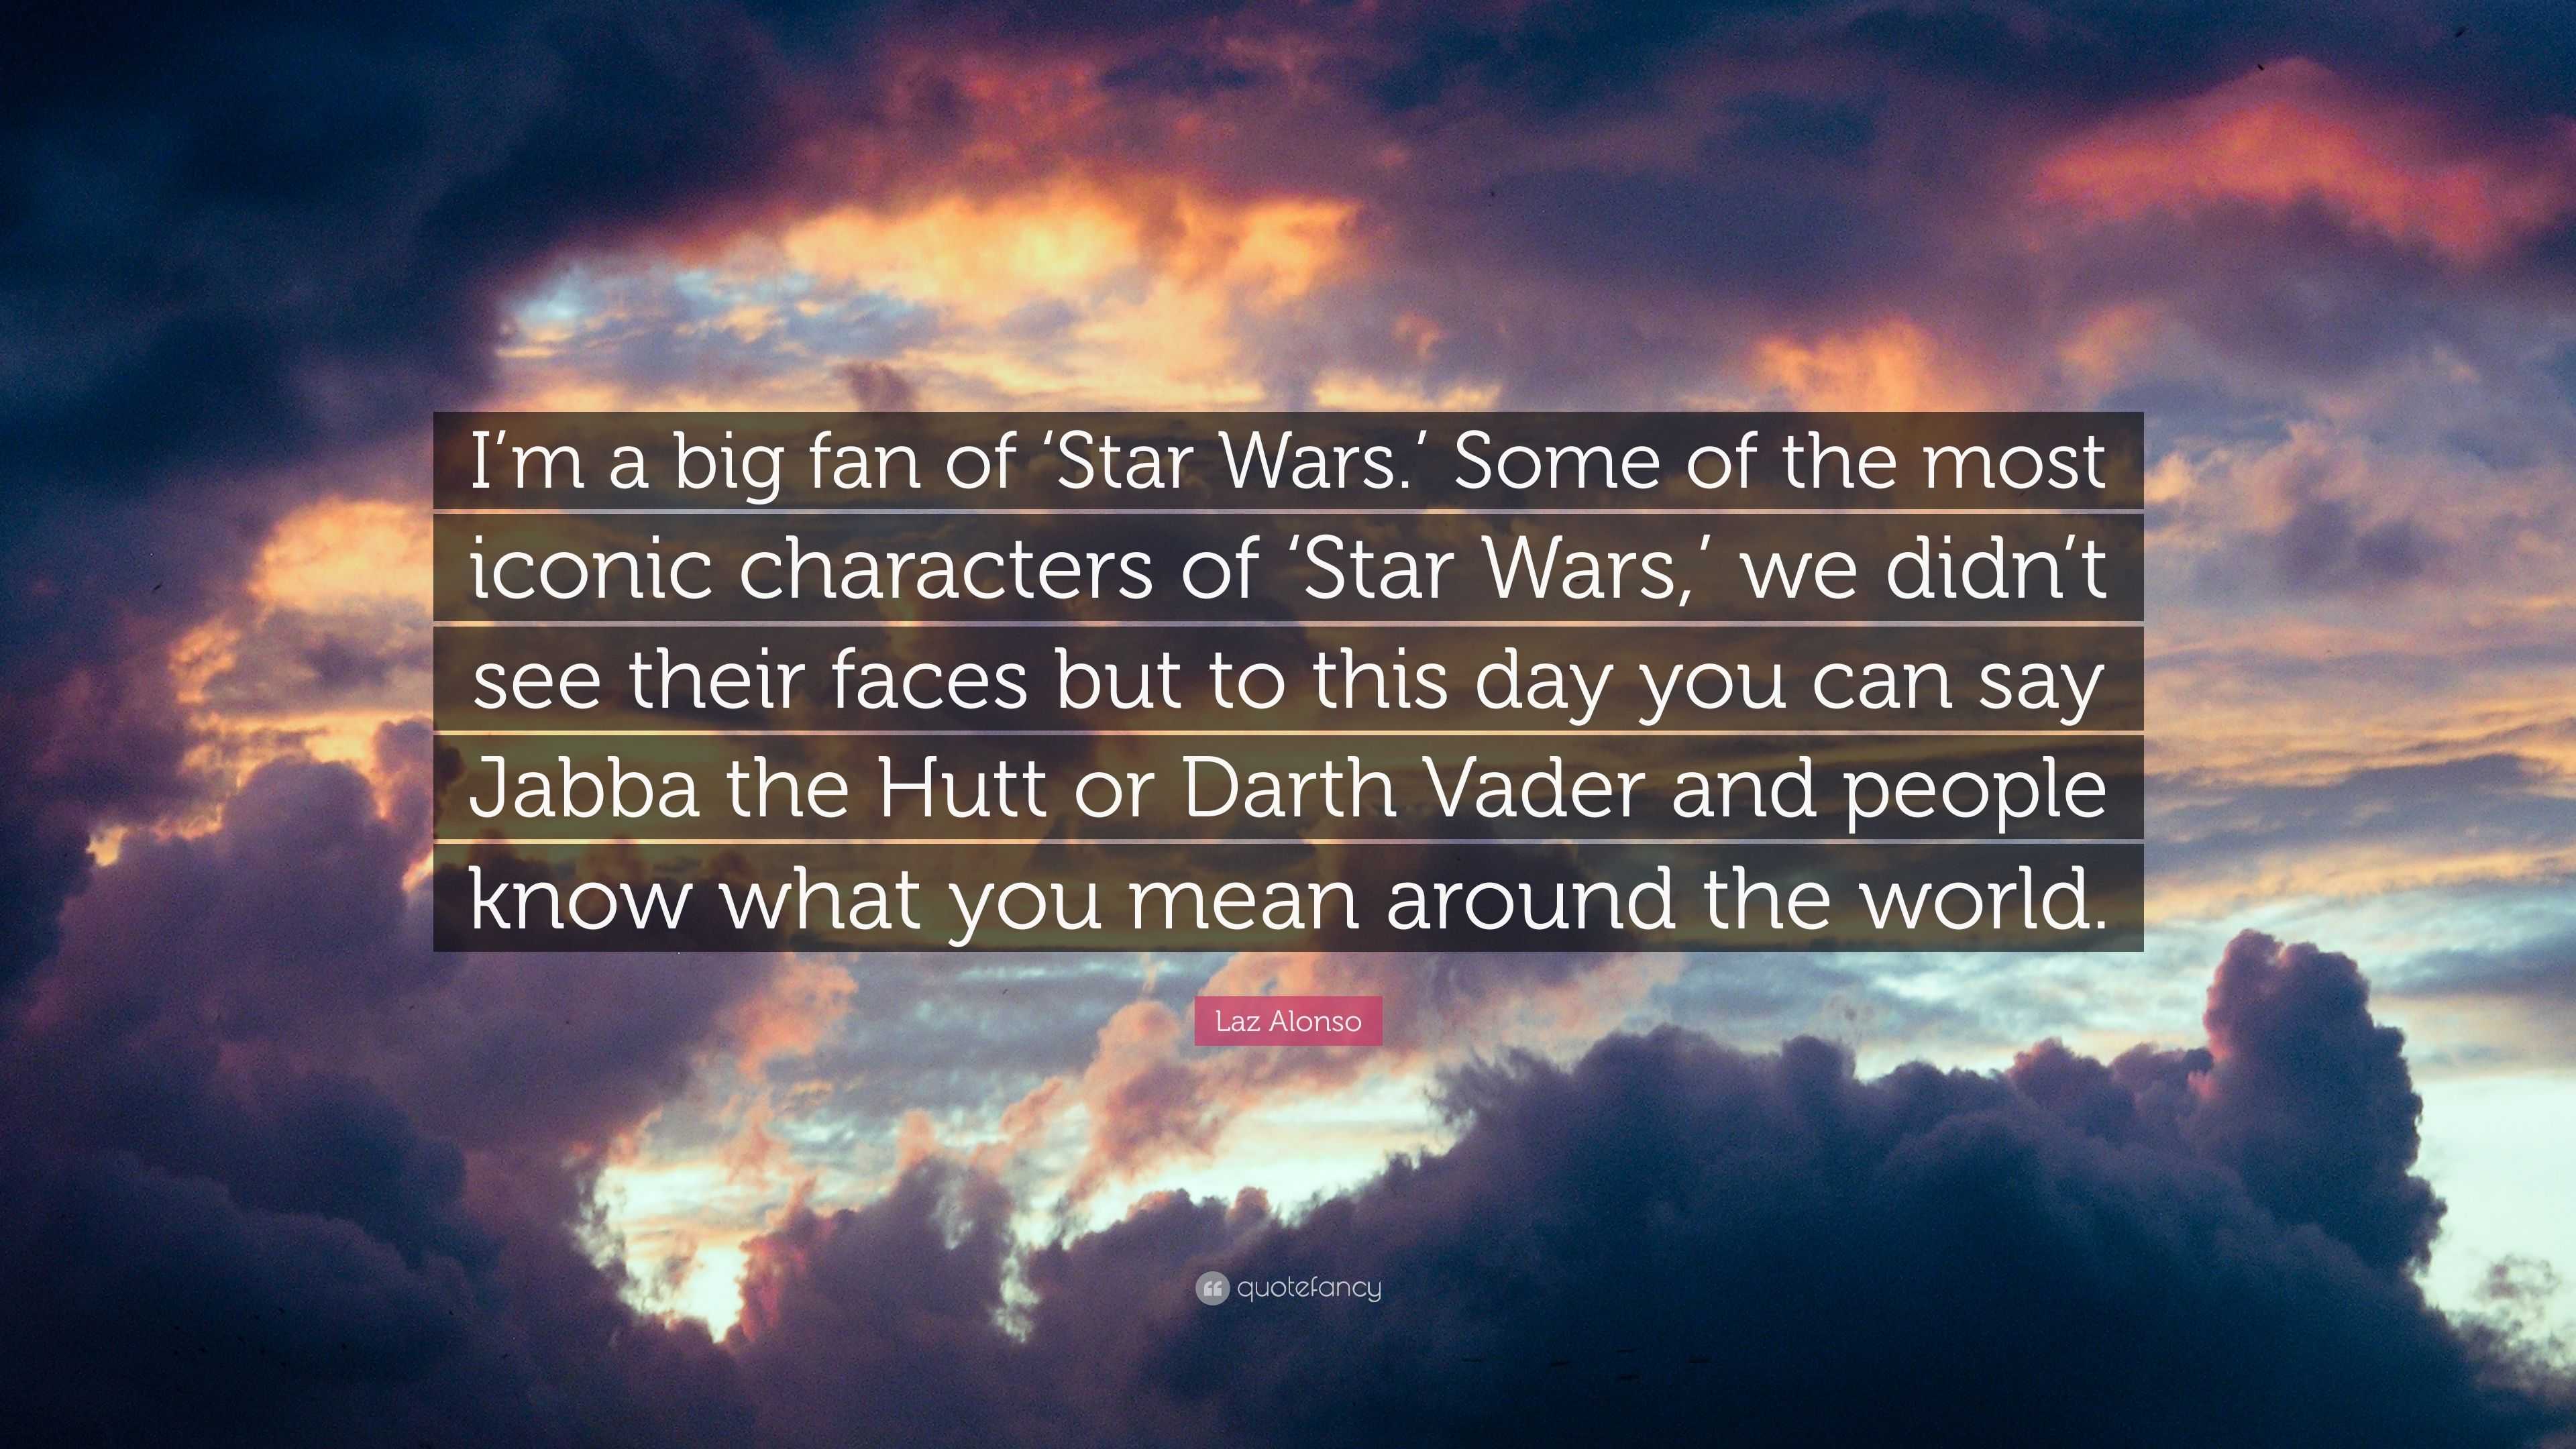 Star Wars: A look at some of Darth Vader's most iconic quotes in